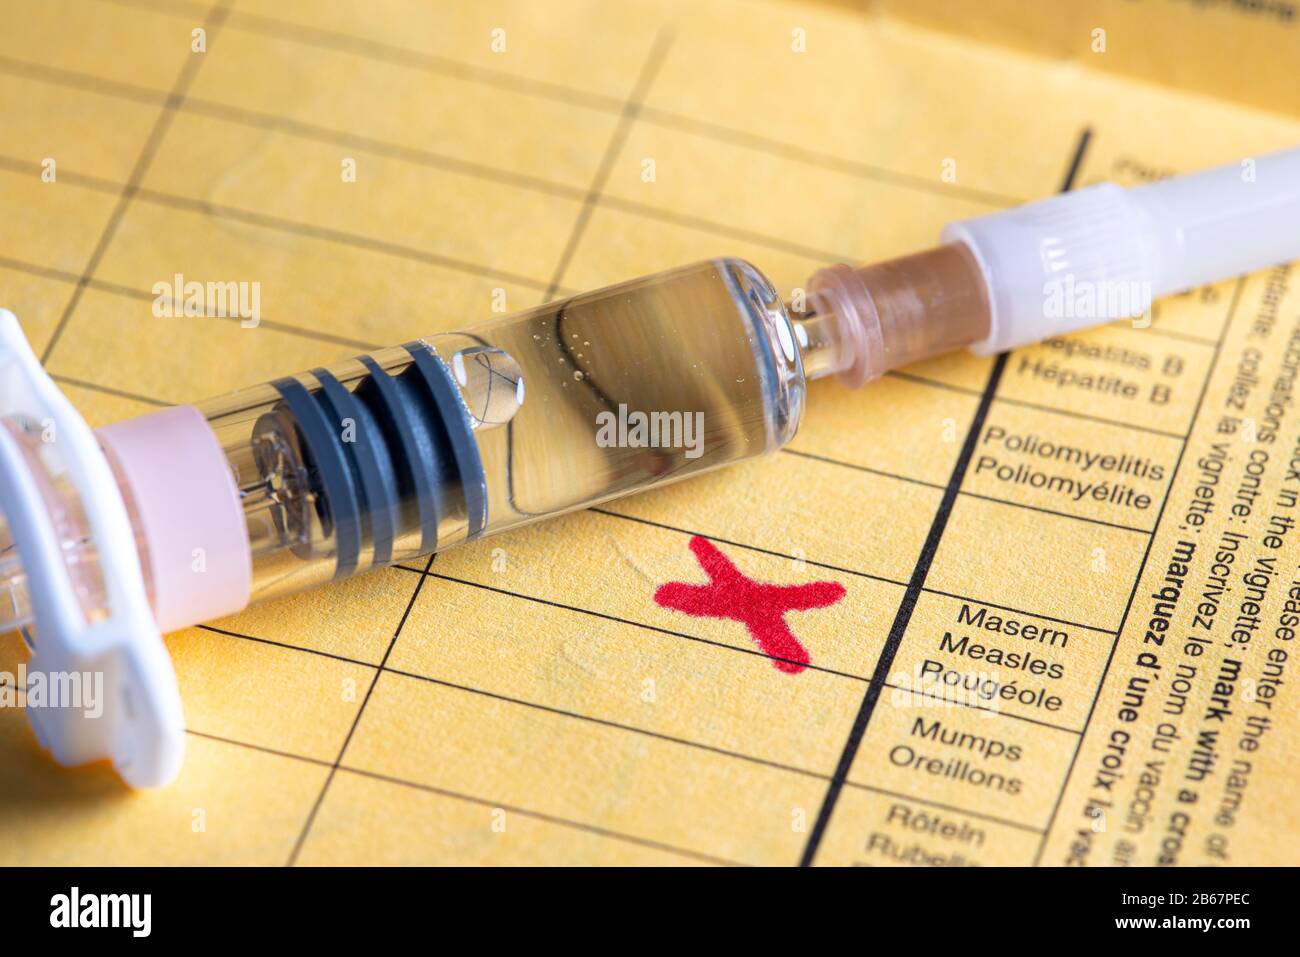 Measles vaccination, vaccination card,  syringe with measles vaccine, symbolic image, Stock Photo